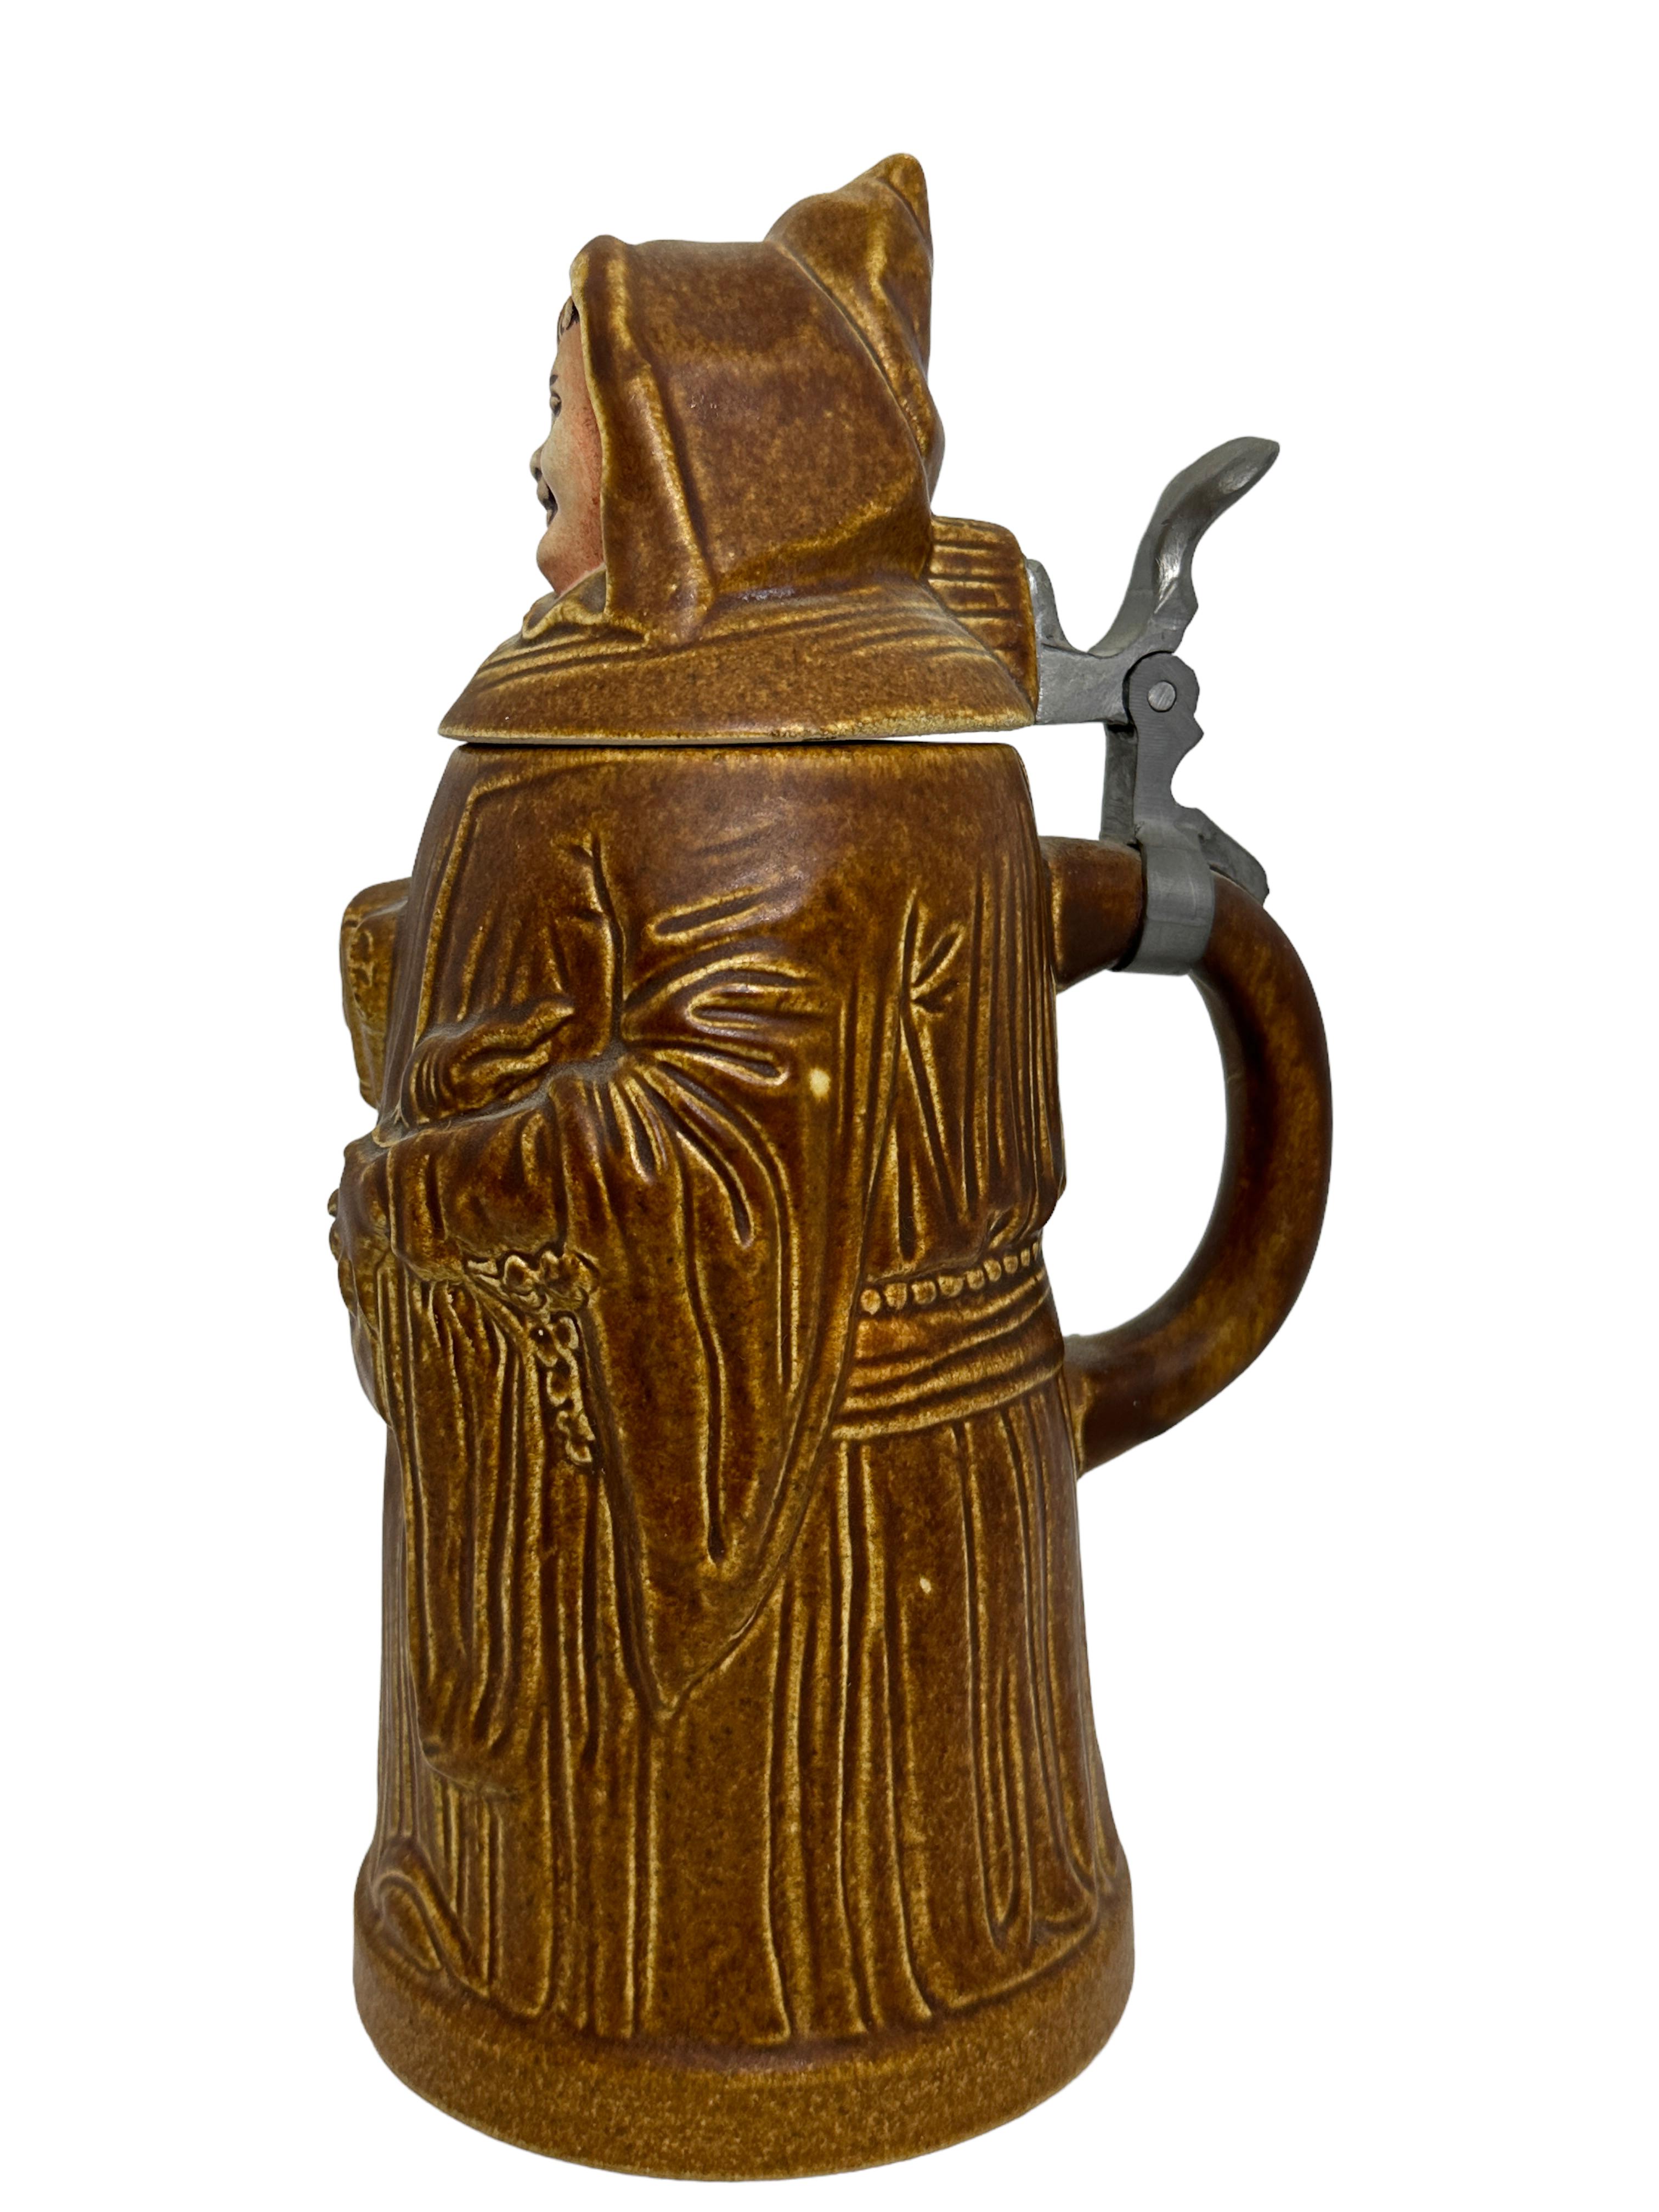 A gorgeous character beer stein - munich child. This character beer stein has been made in Germany circa 1960s or older. Absolutely gorgeous piece handcrafted and still in great condition. Lid works properly. Nice addition to any collection or just